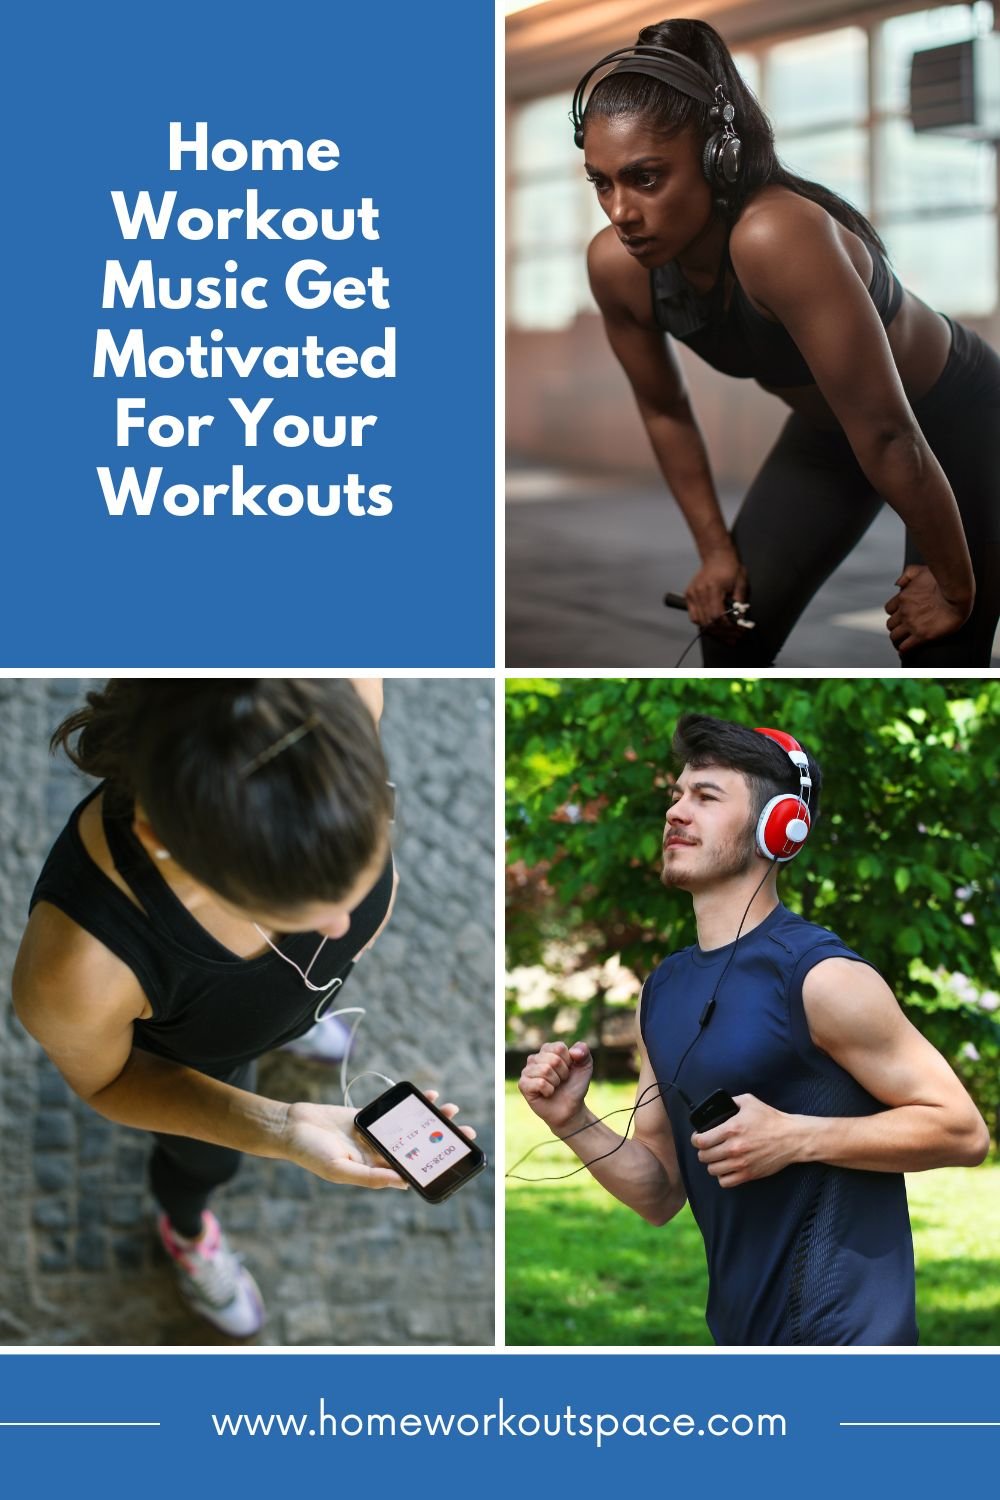 Home Workout Music Get Motivated For Your Workouts